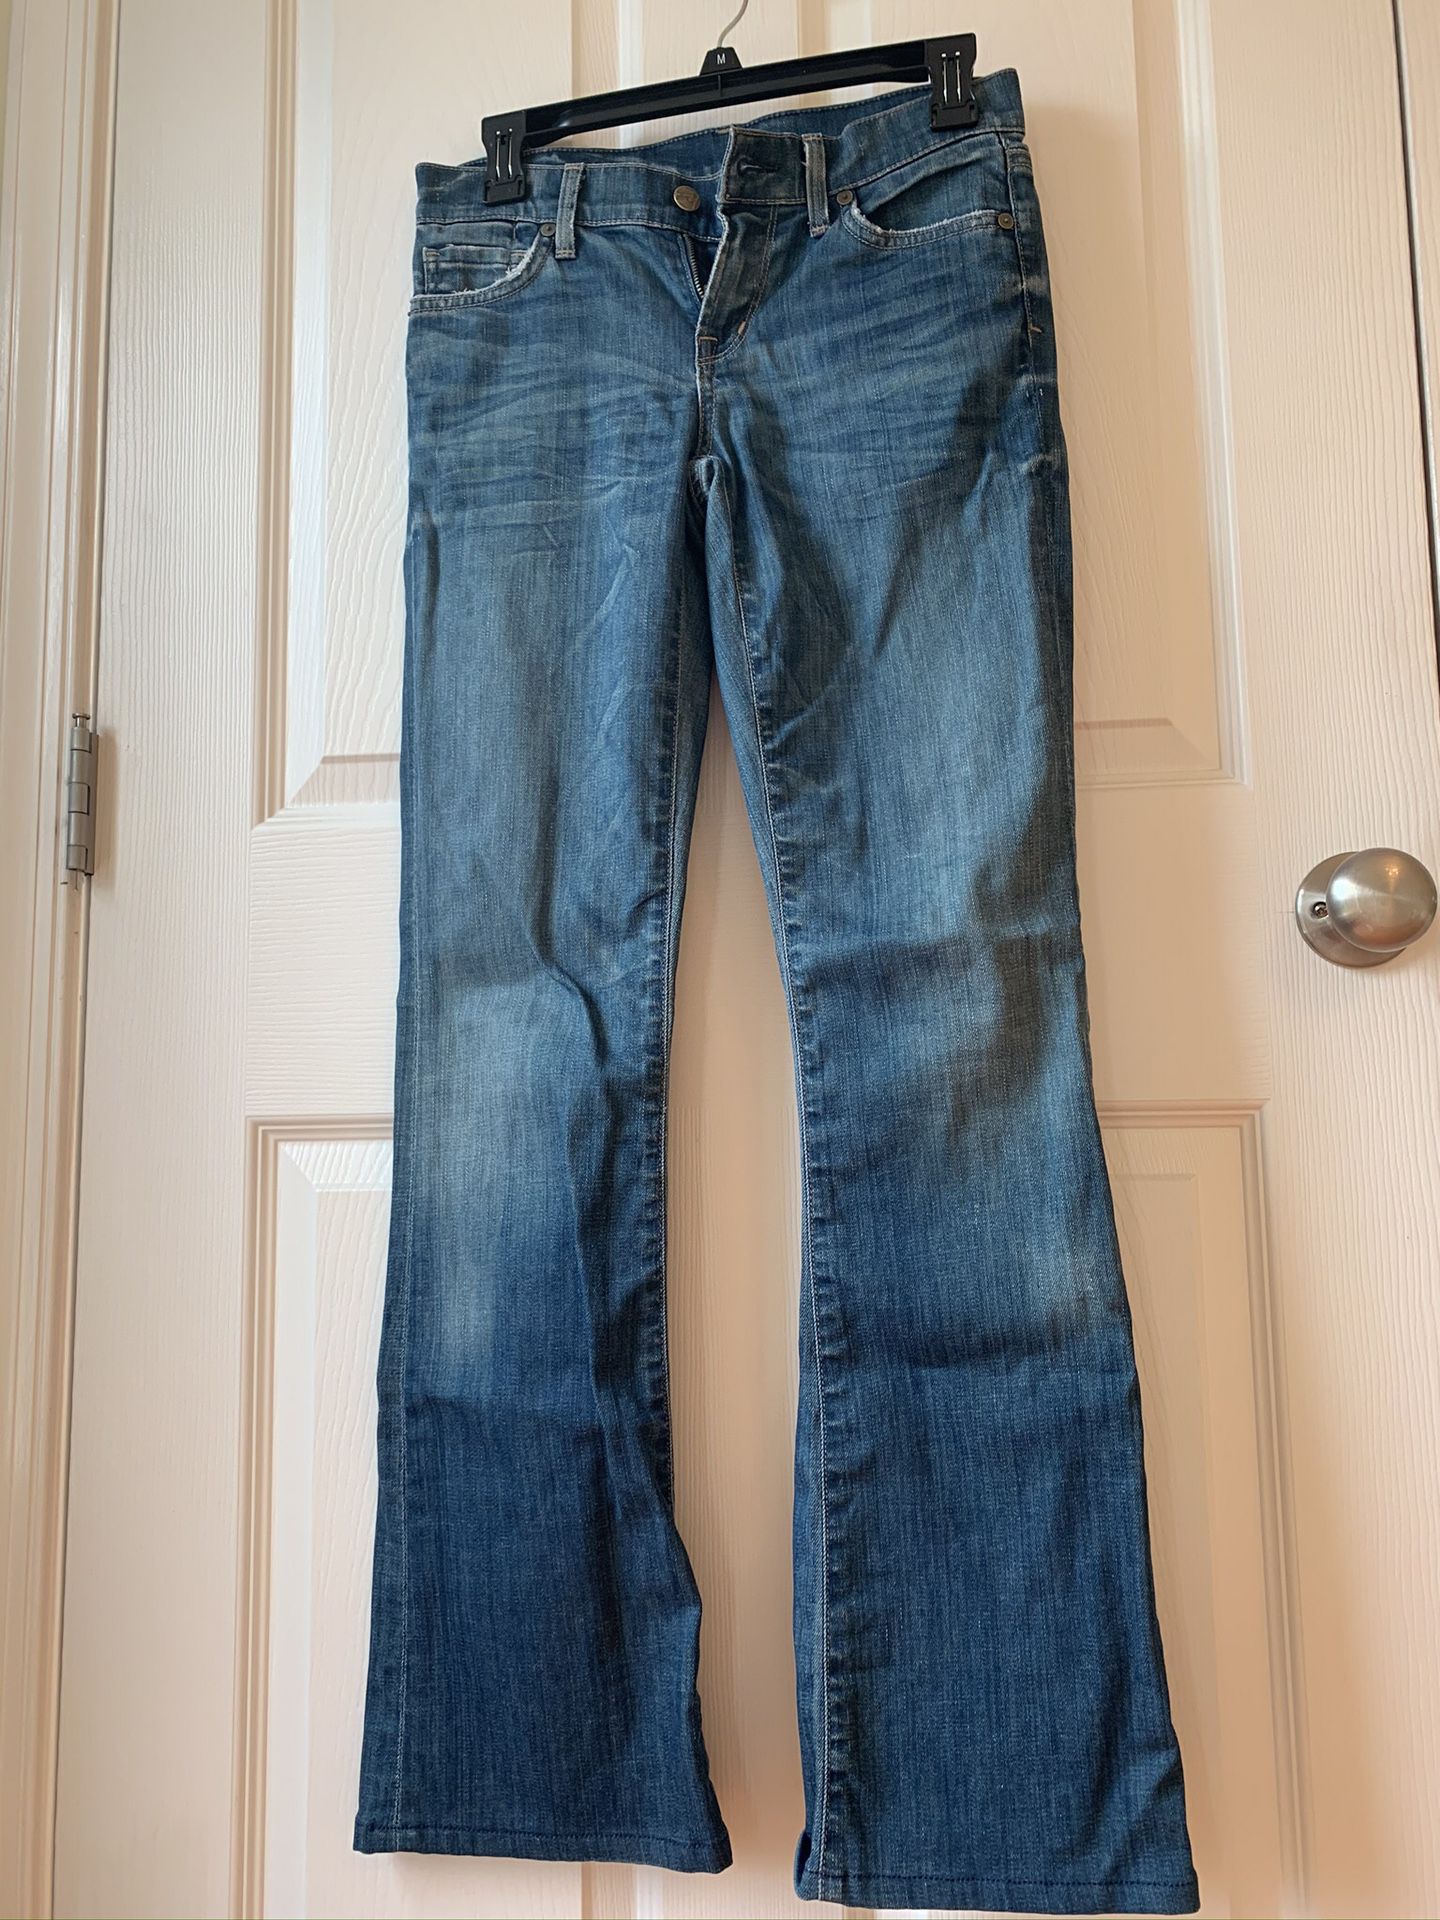 Citizens of Humanity Jeans- size 25